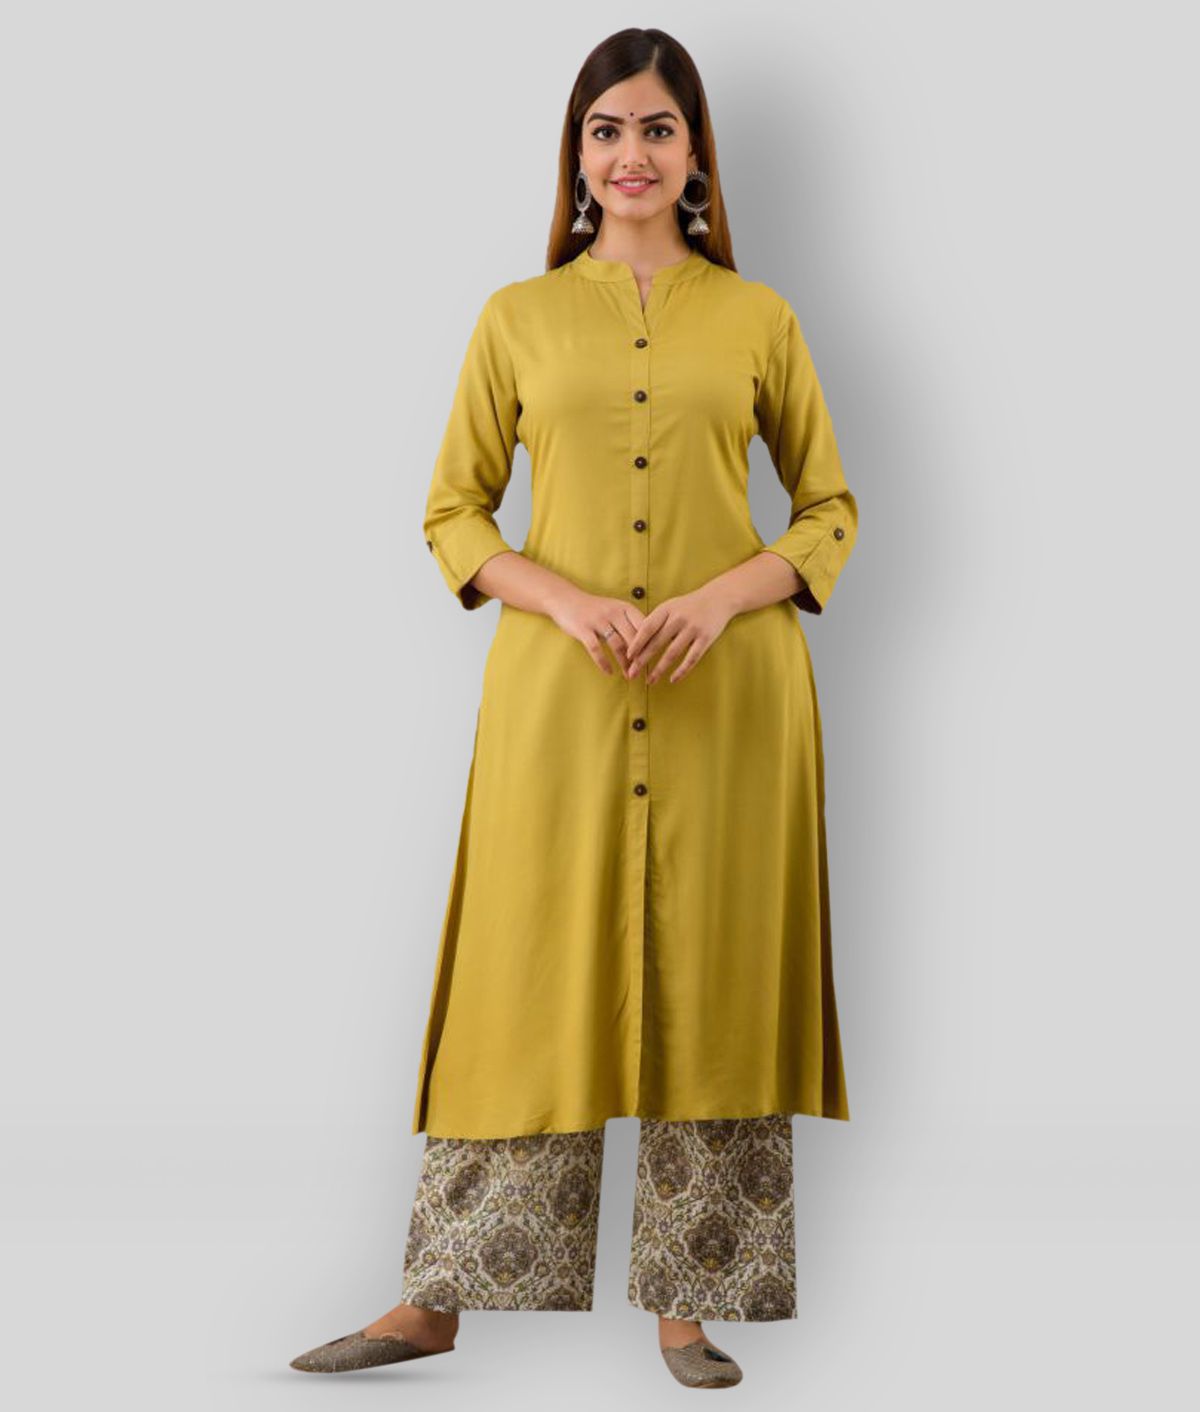     			MAUKA - Green Front Slit Rayon Women's Stitched Salwar Suit ( Pack of 1 )